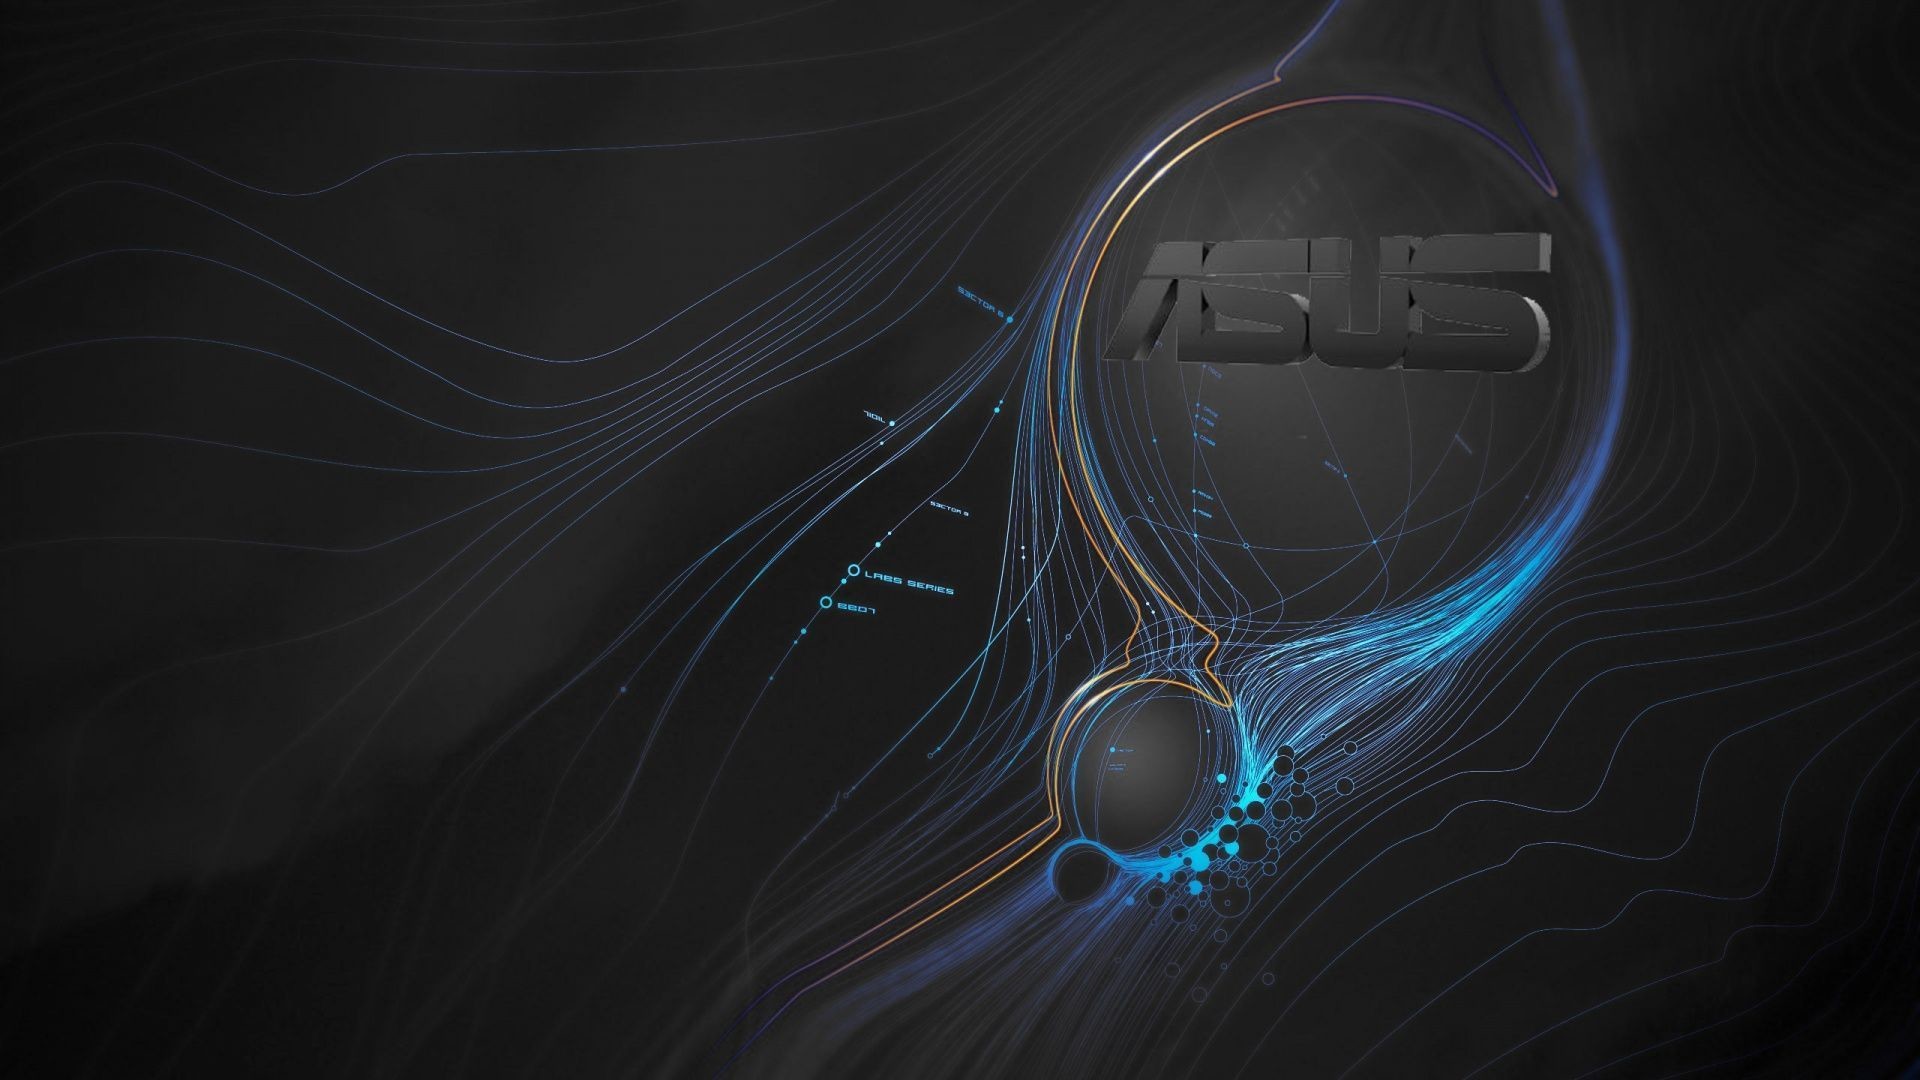 1920x1080 Asus wallpaper 2737 1920?1080 download high resolution wallpapers .